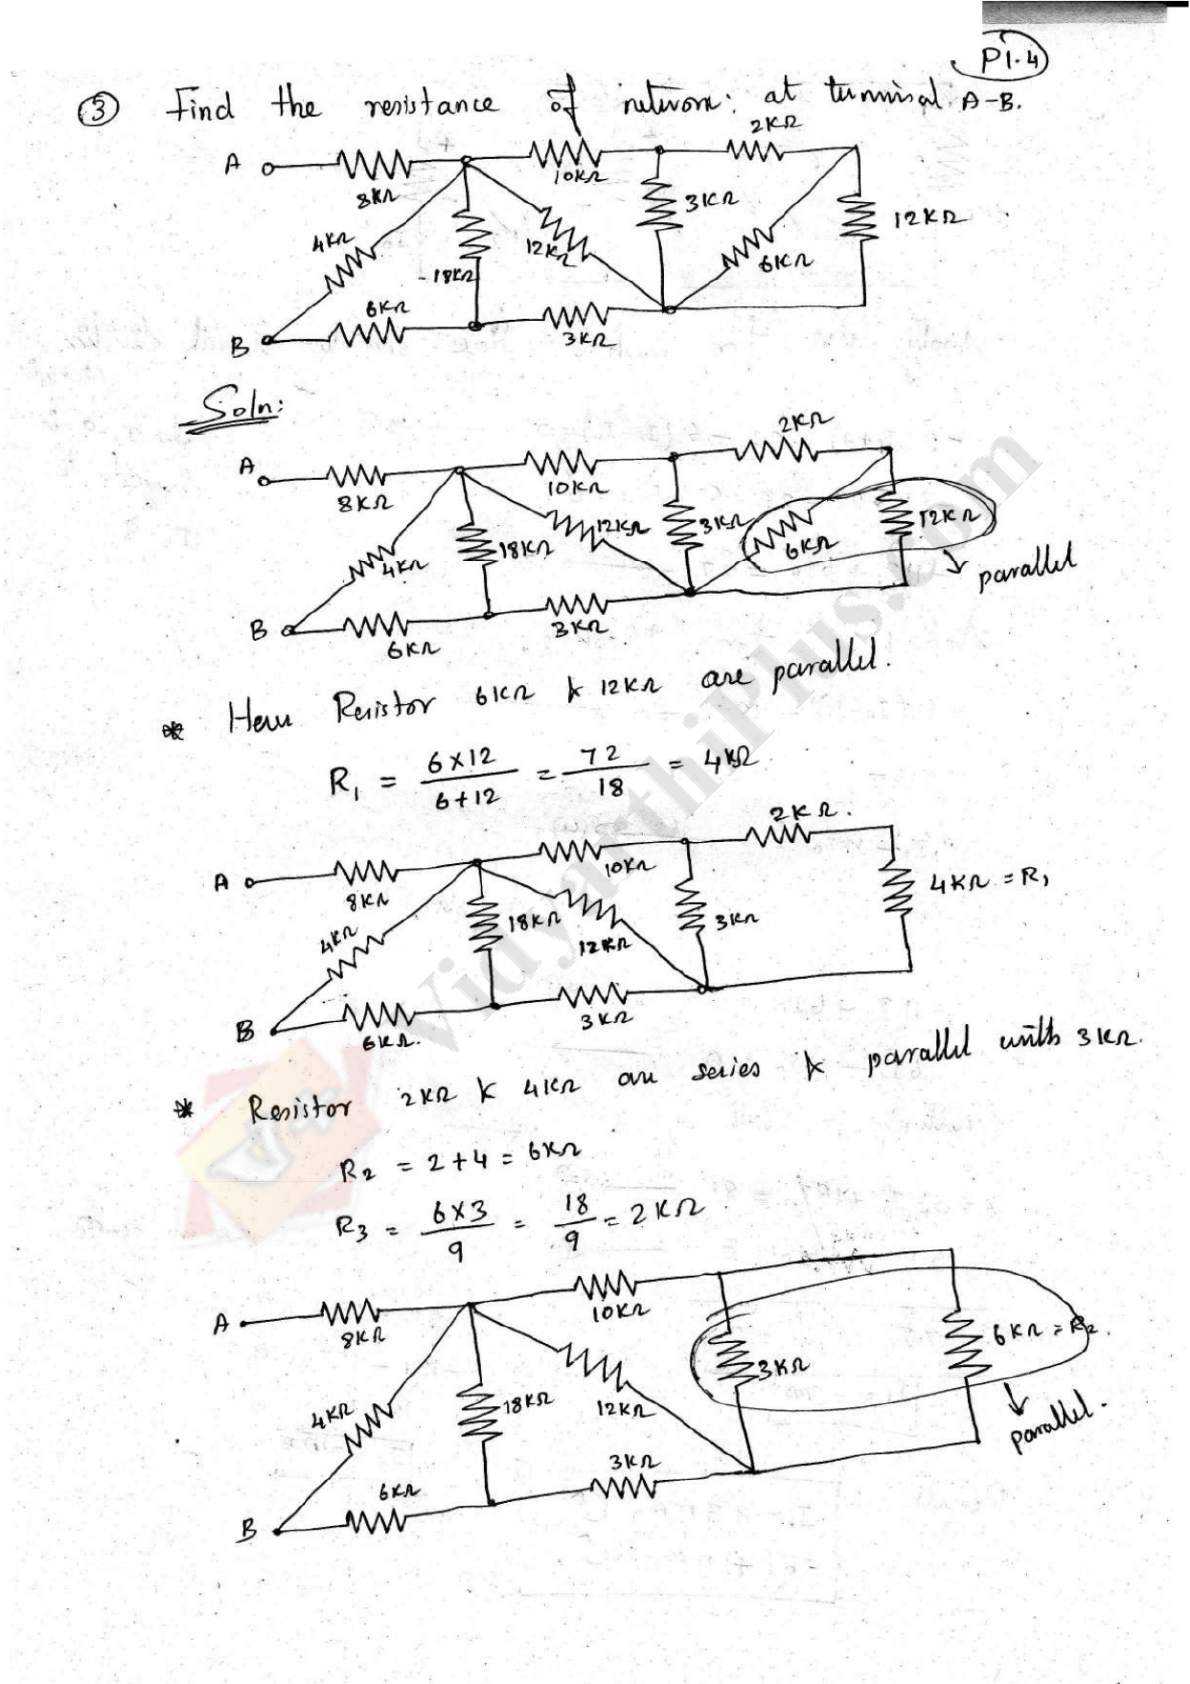 Electric Circuits and Starting And Speed Control Solved Problems (10 Problems) - Sridhar Edition